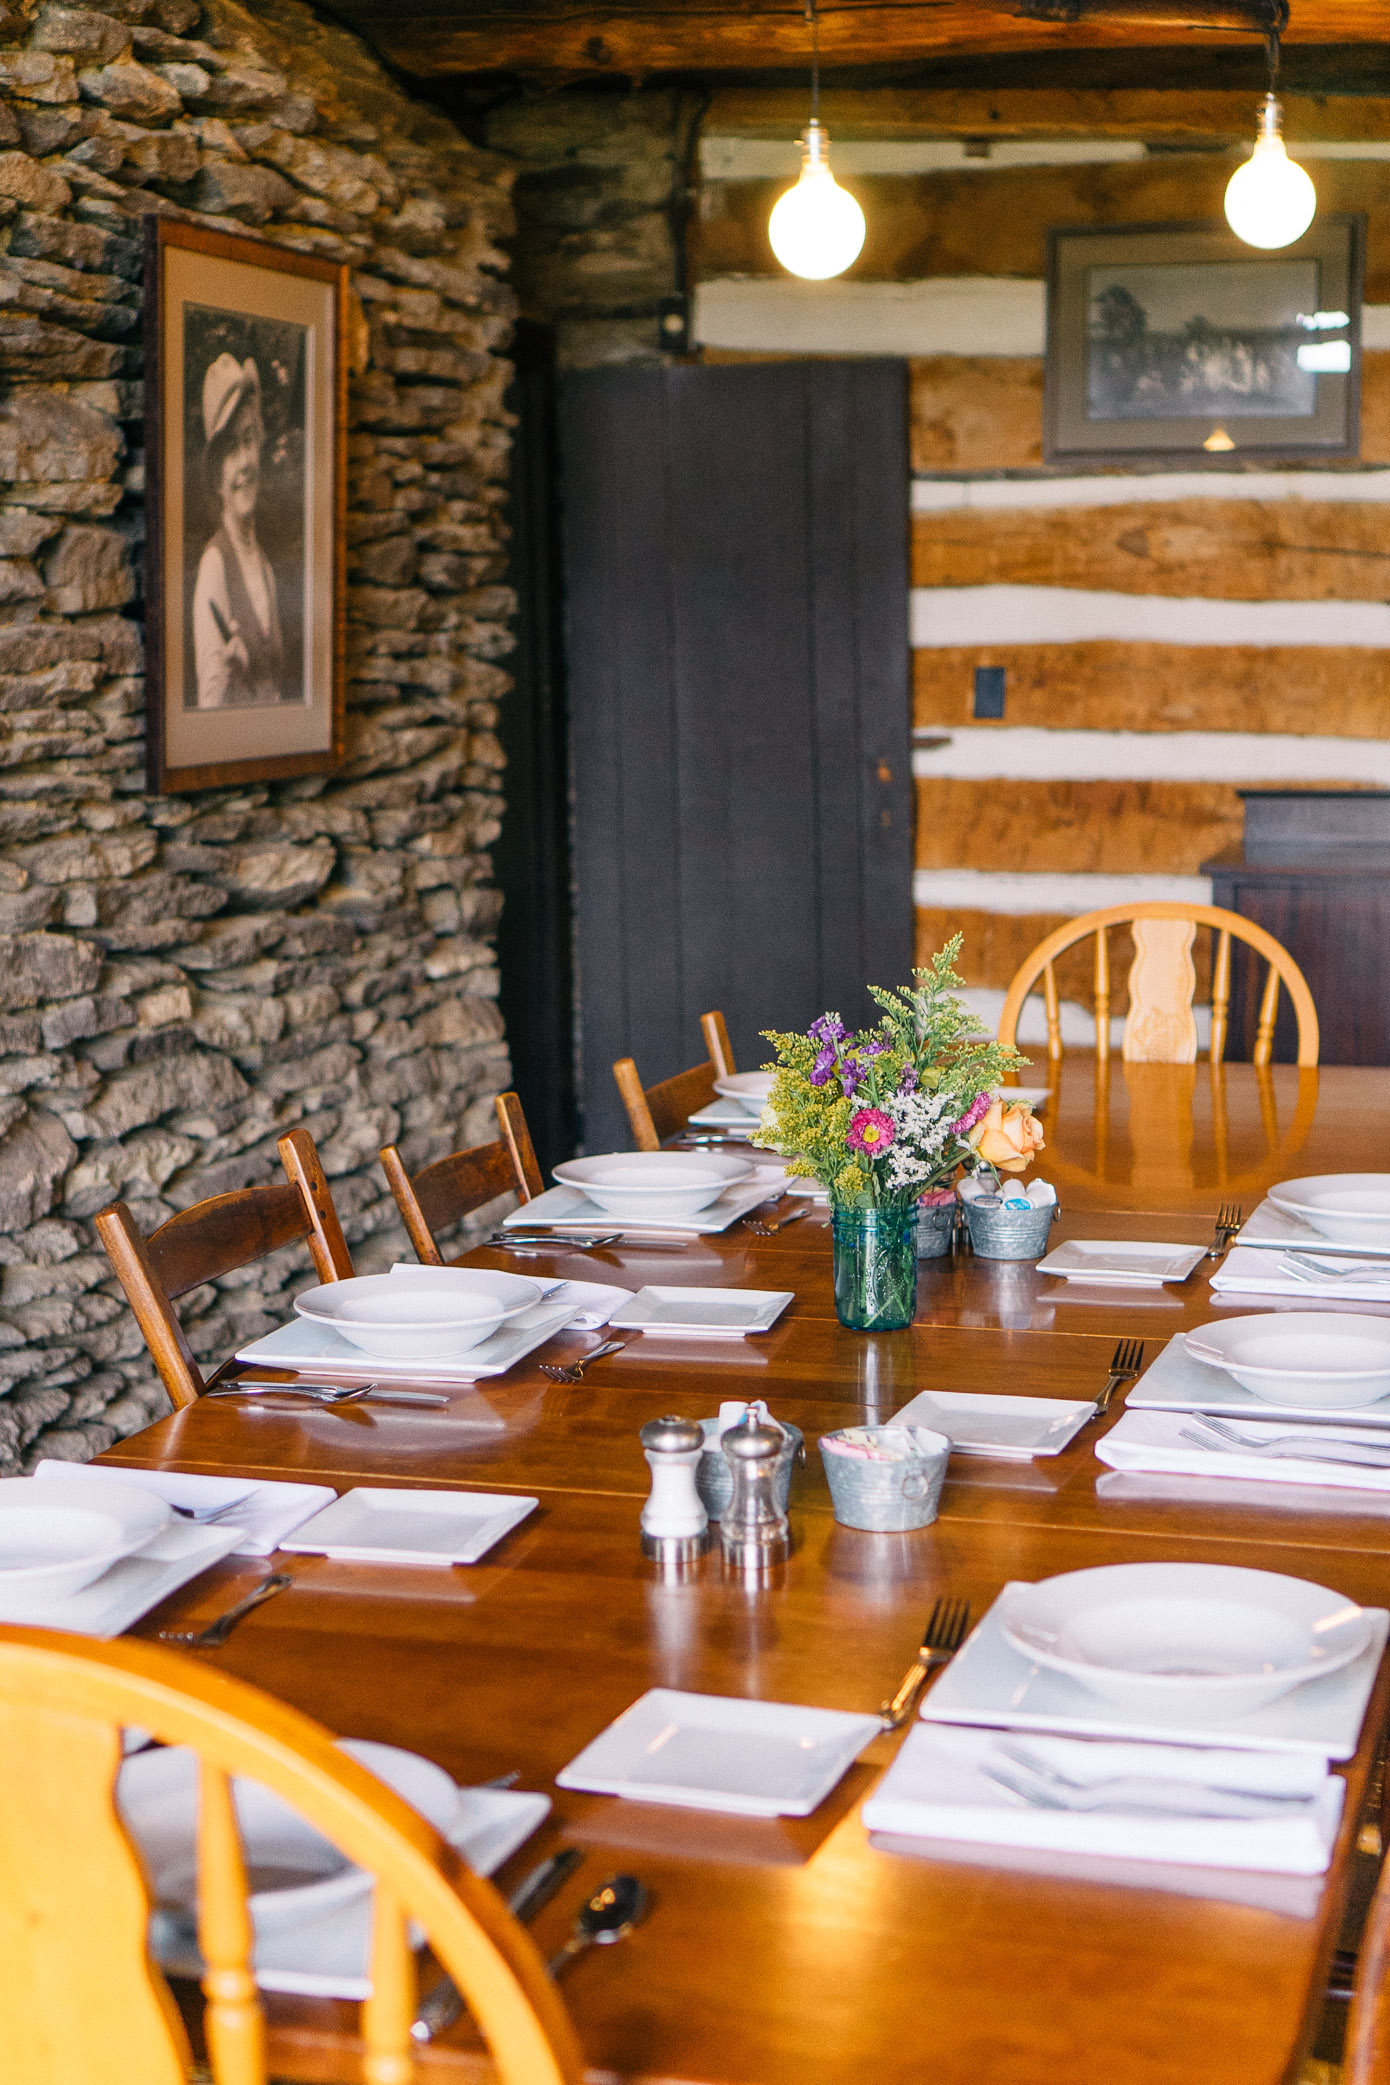 Cataloochee Ranch Review | Where to Eat in Maggie Valley, NC | Louella Reese Life & Style Blog